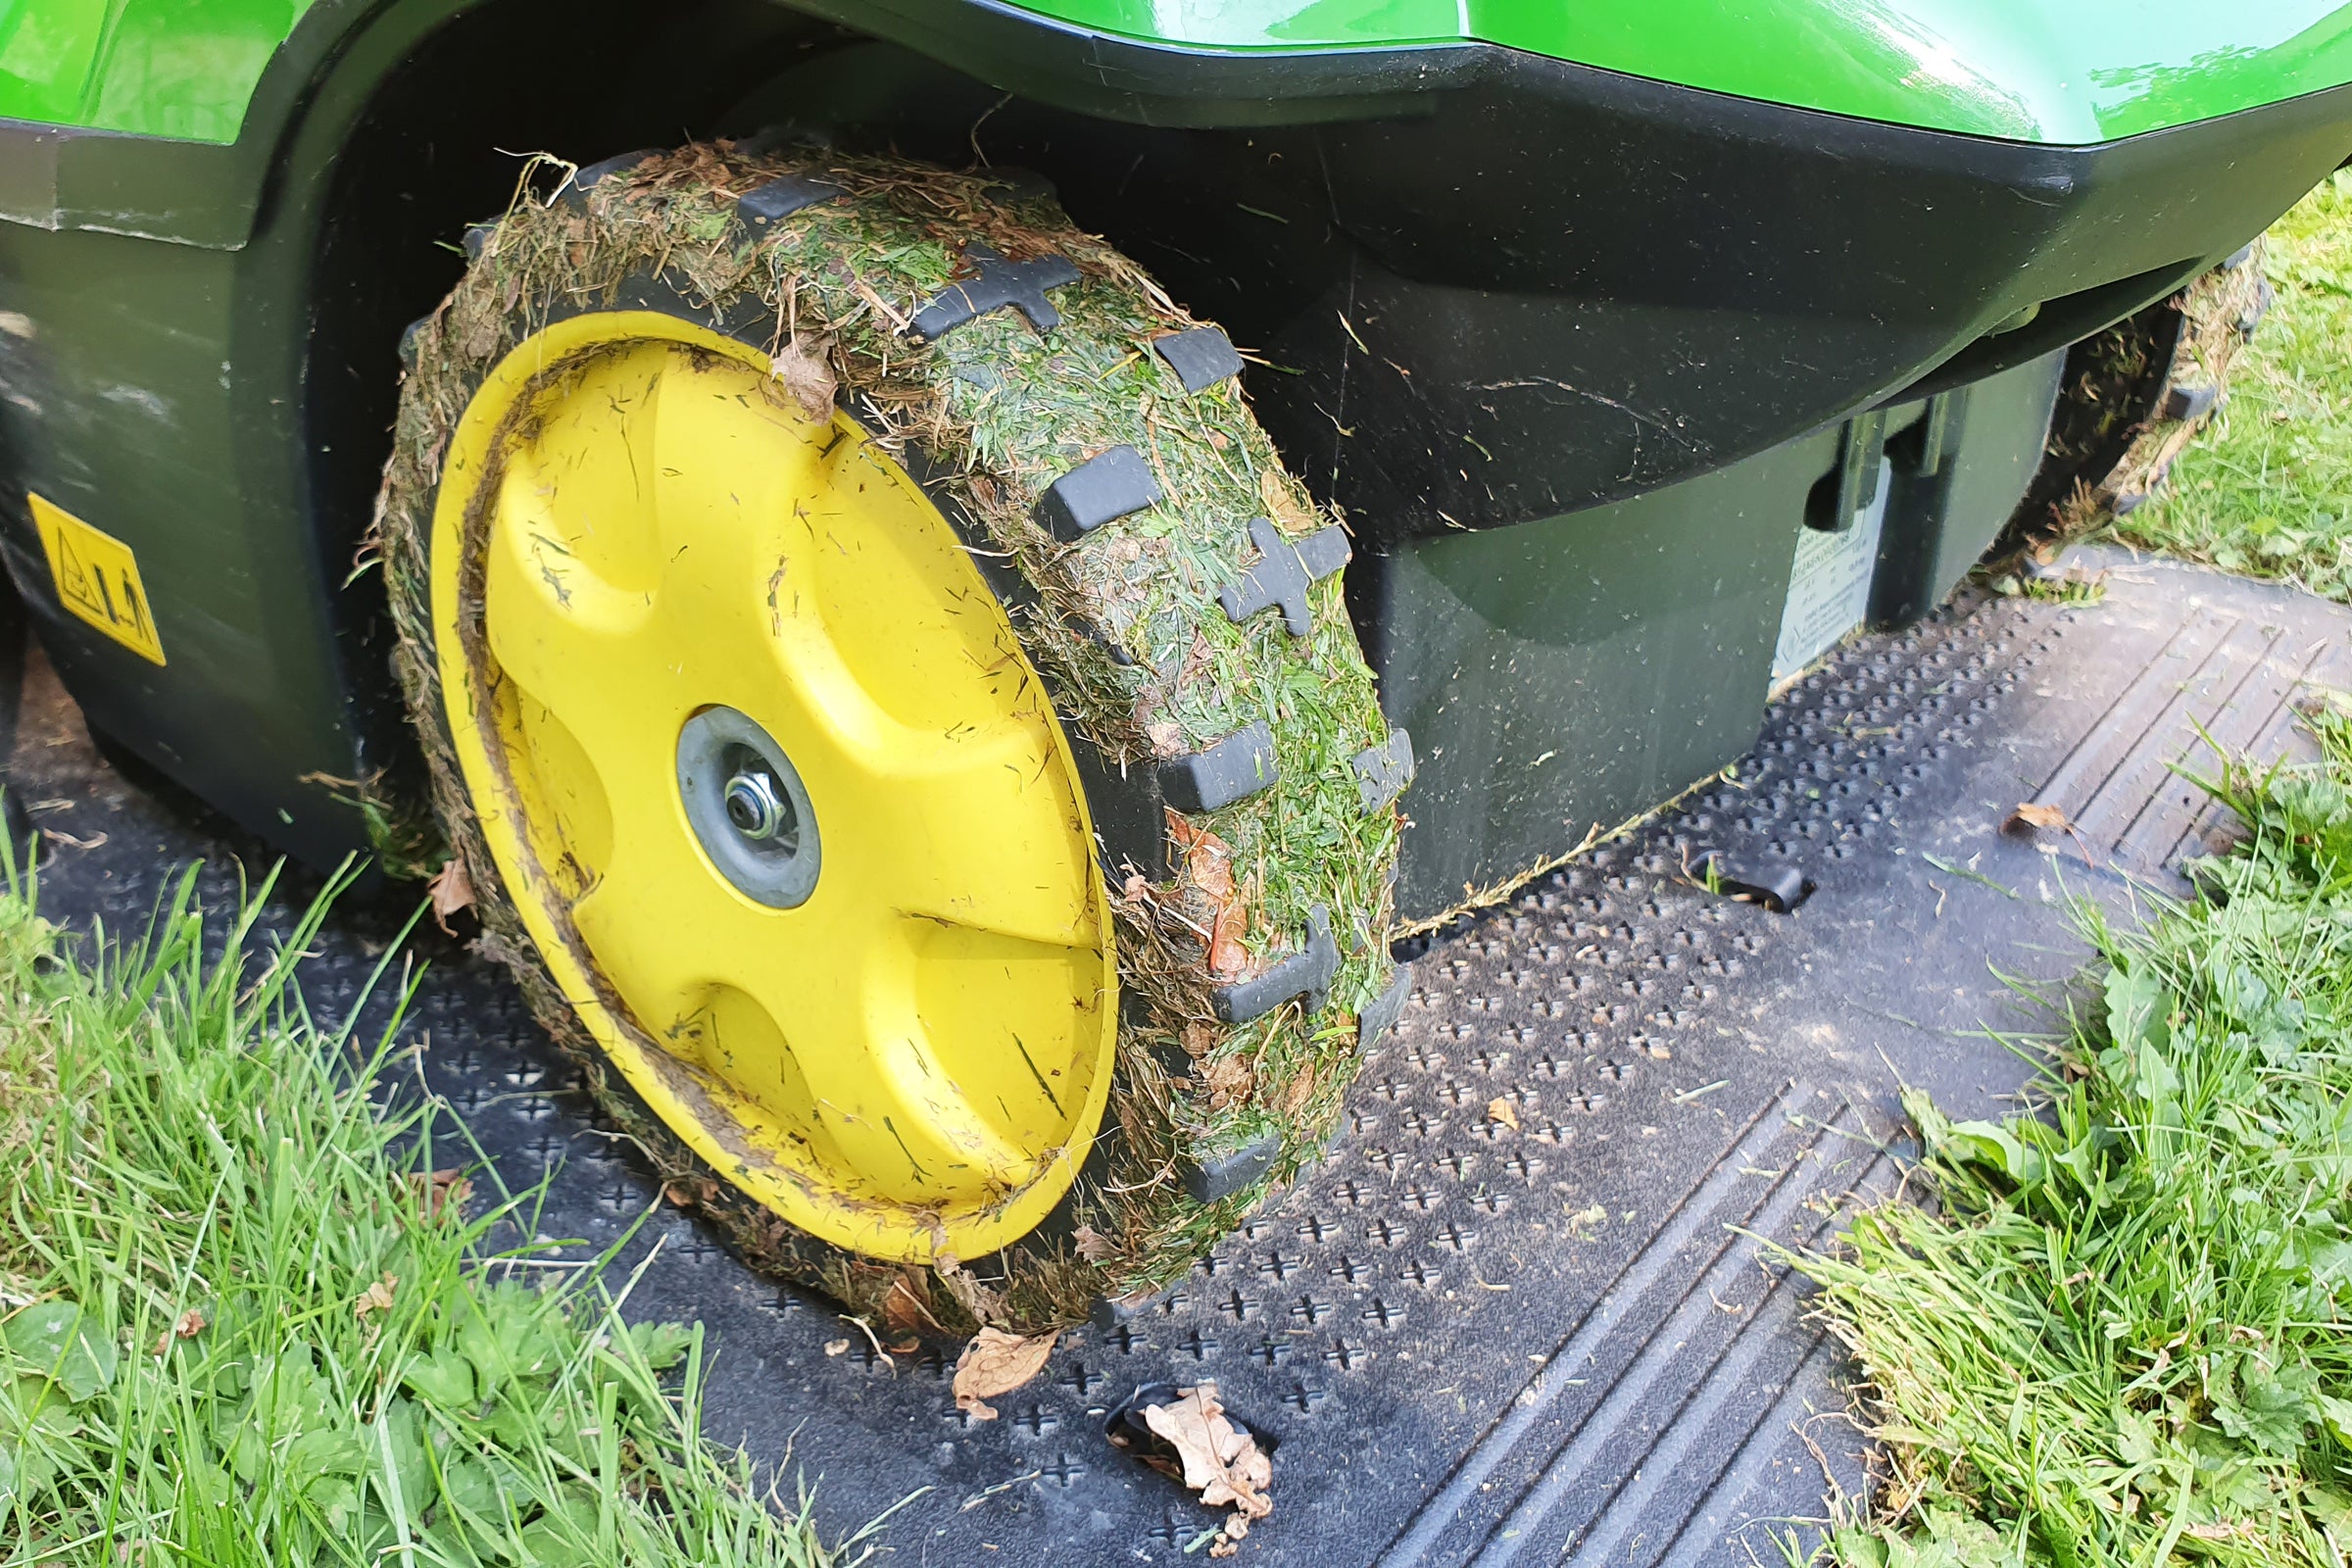 Close up view of dirty tyres of John Deere Tango robot lawnmower resting on it's station in a lawn